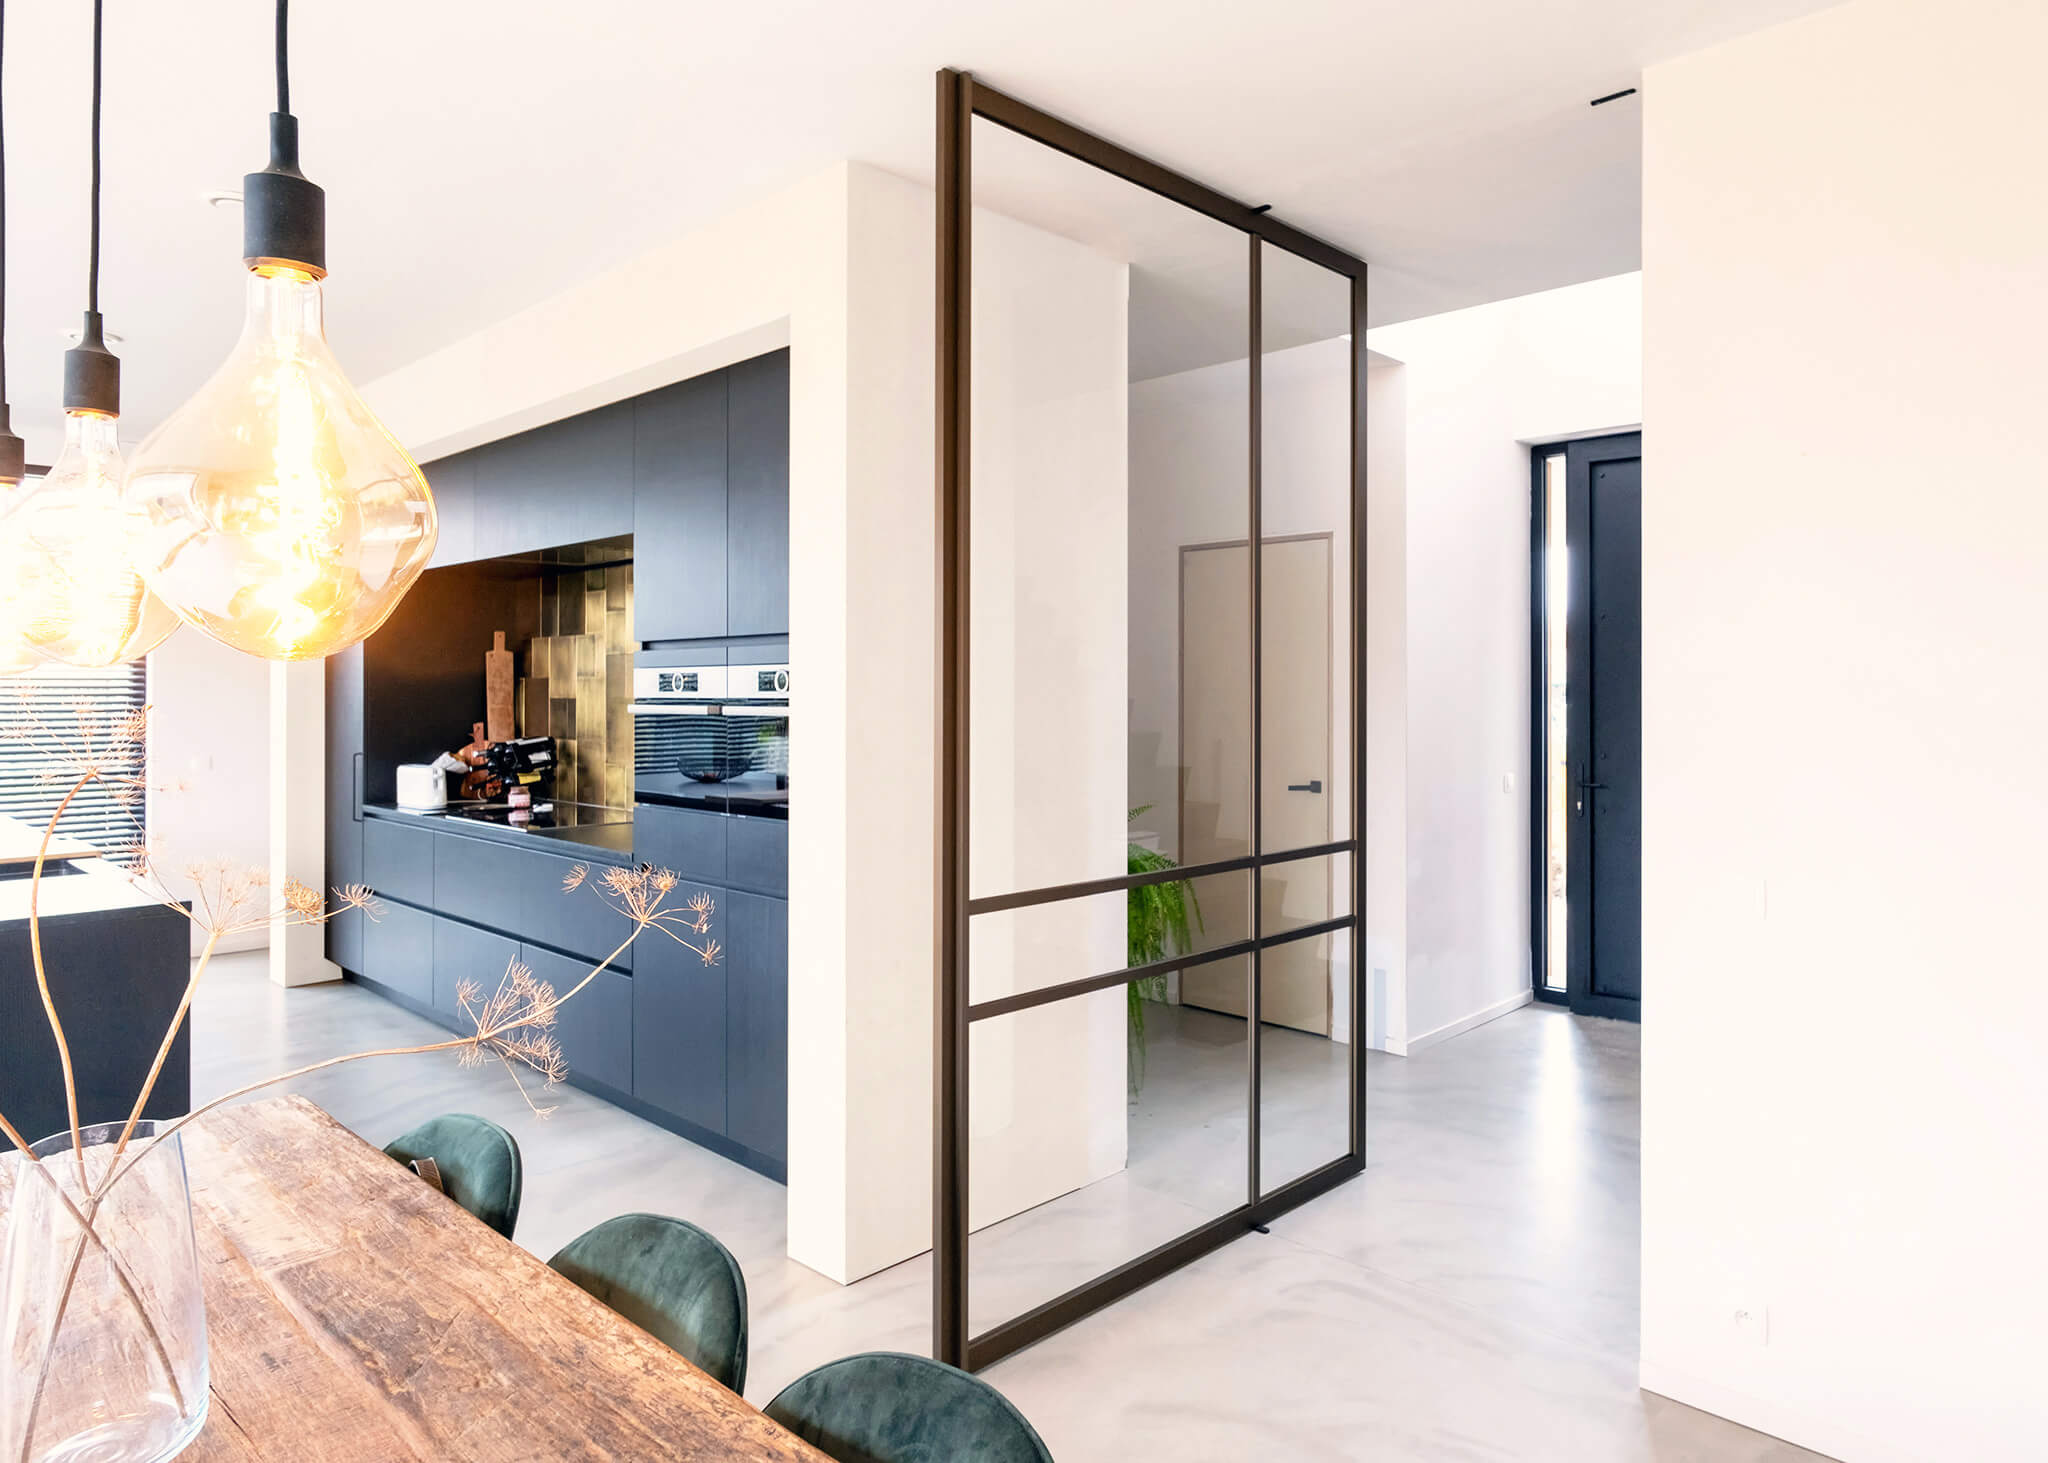 ANYWAYdoors steel look door, a large modern glass door with horizontal and vertical lines in steel look optics. The door is open and leading into a kitchen and dining room. the overall kitchen is modern, has light beige walls and a wooden table